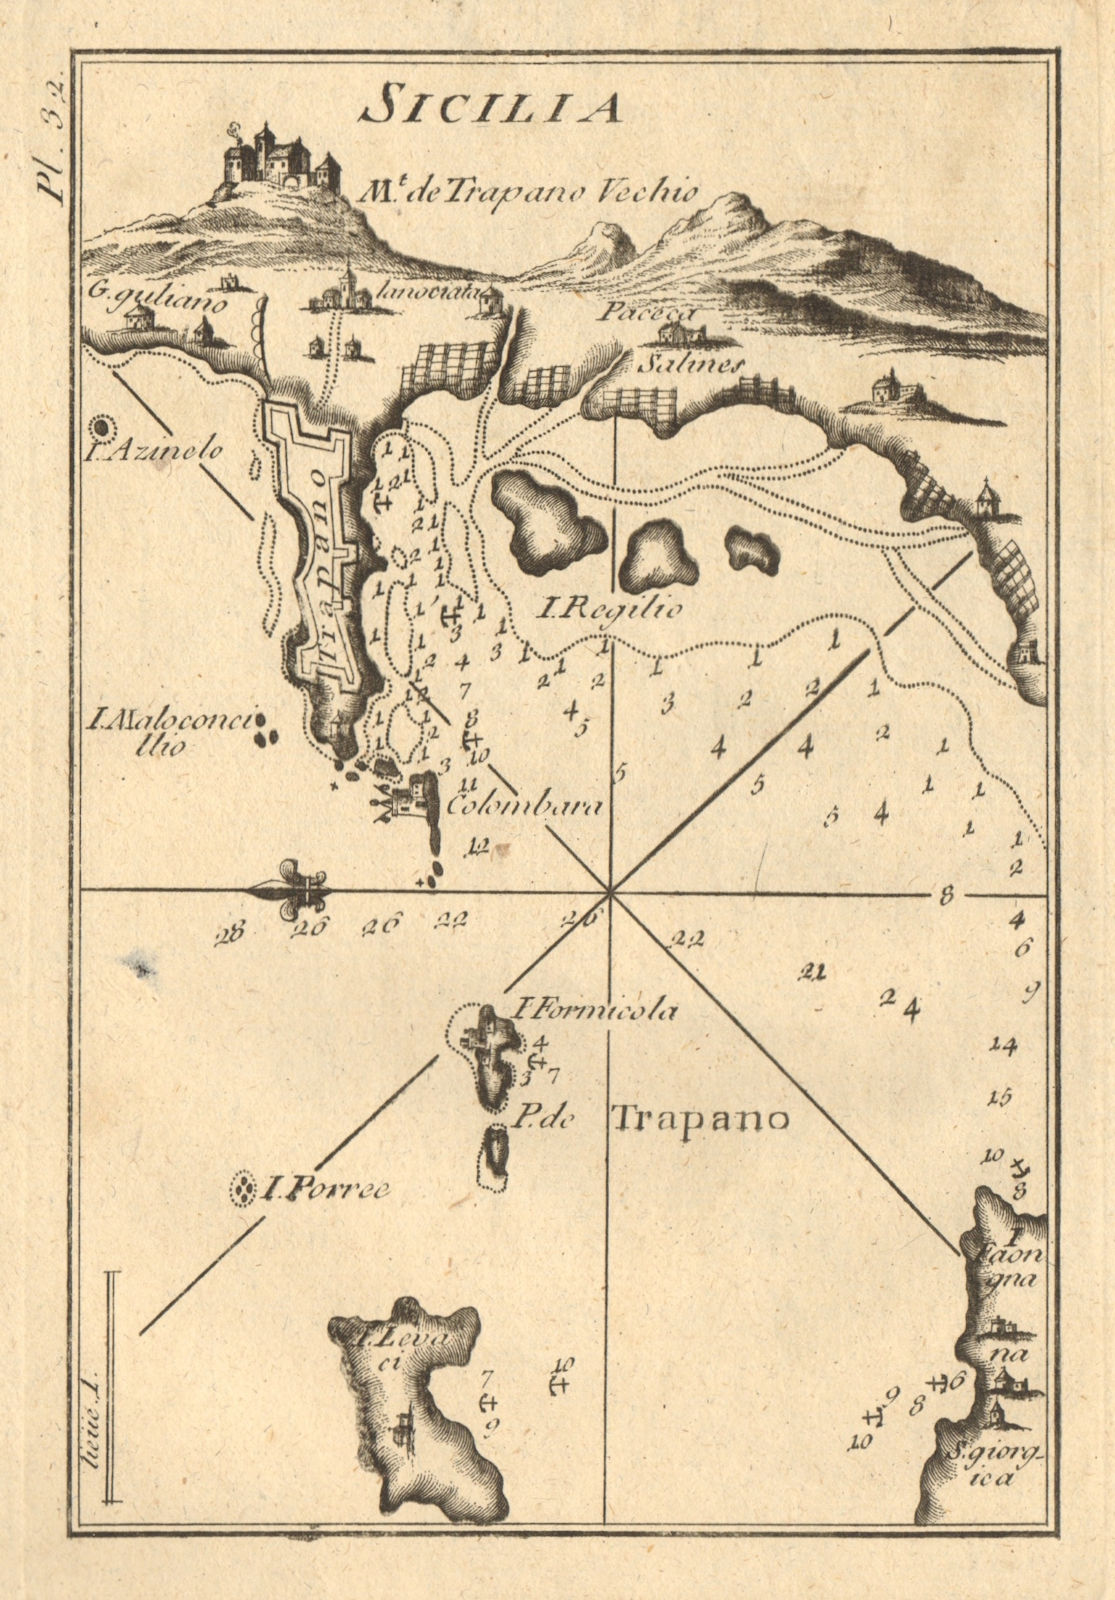 Trapano - Sicilia. Plan of the Port of Trapani. Sicily, Italy. ROUX 1804 map